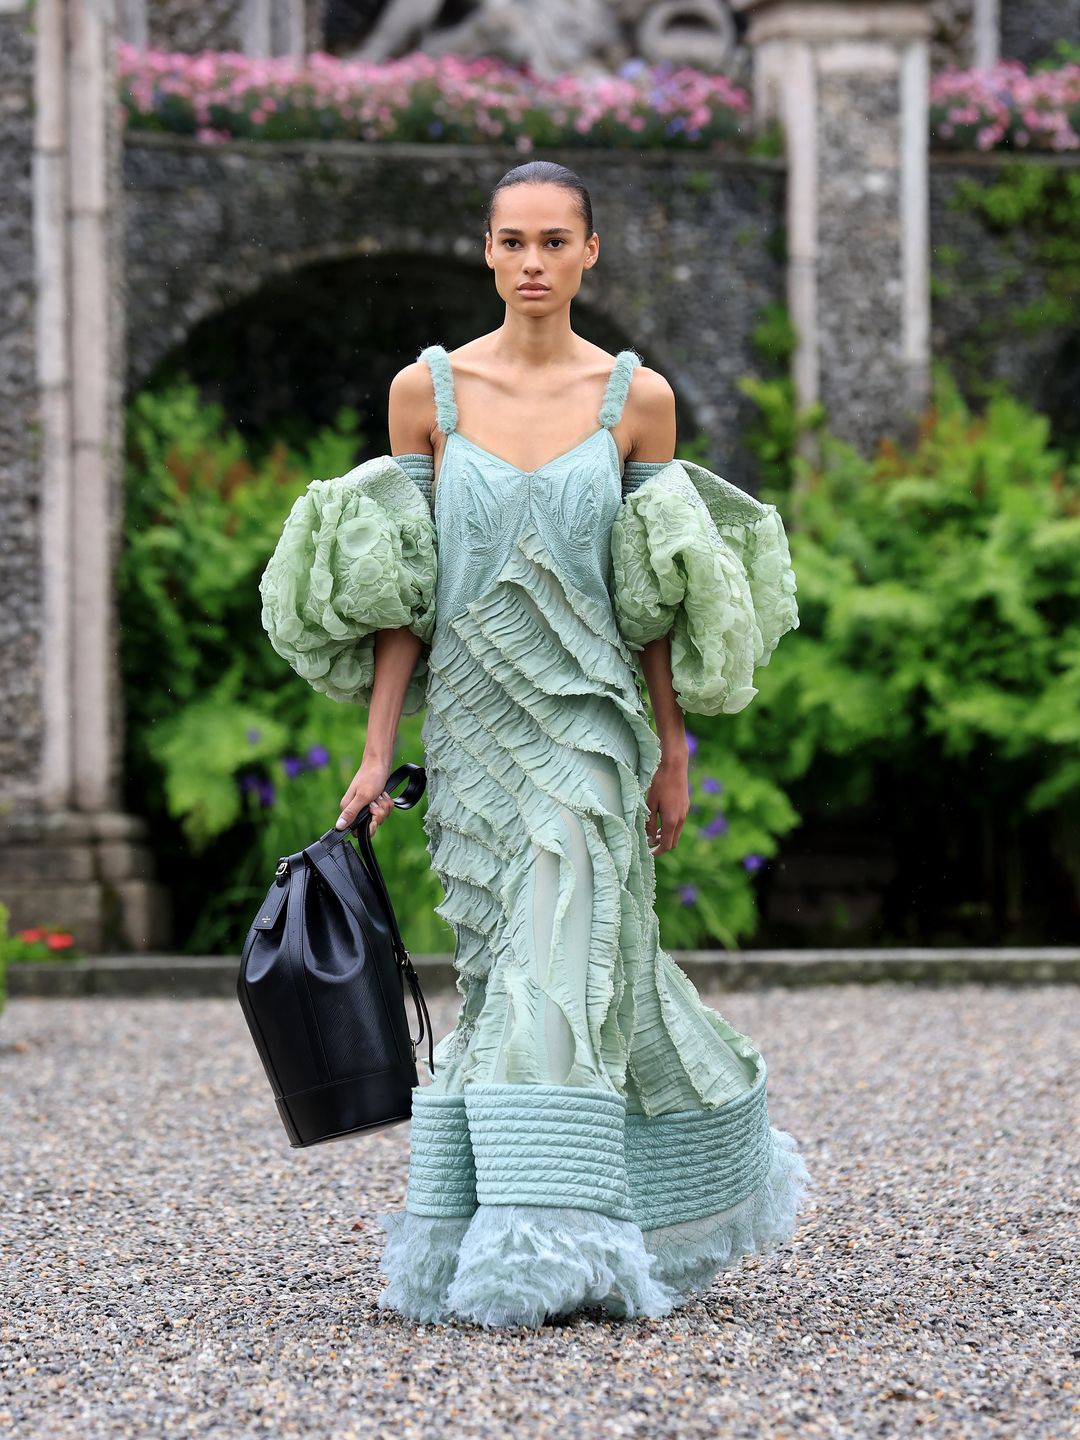 Louis Vuitton model walking the runway in green textured gown with voluminous sleeves 